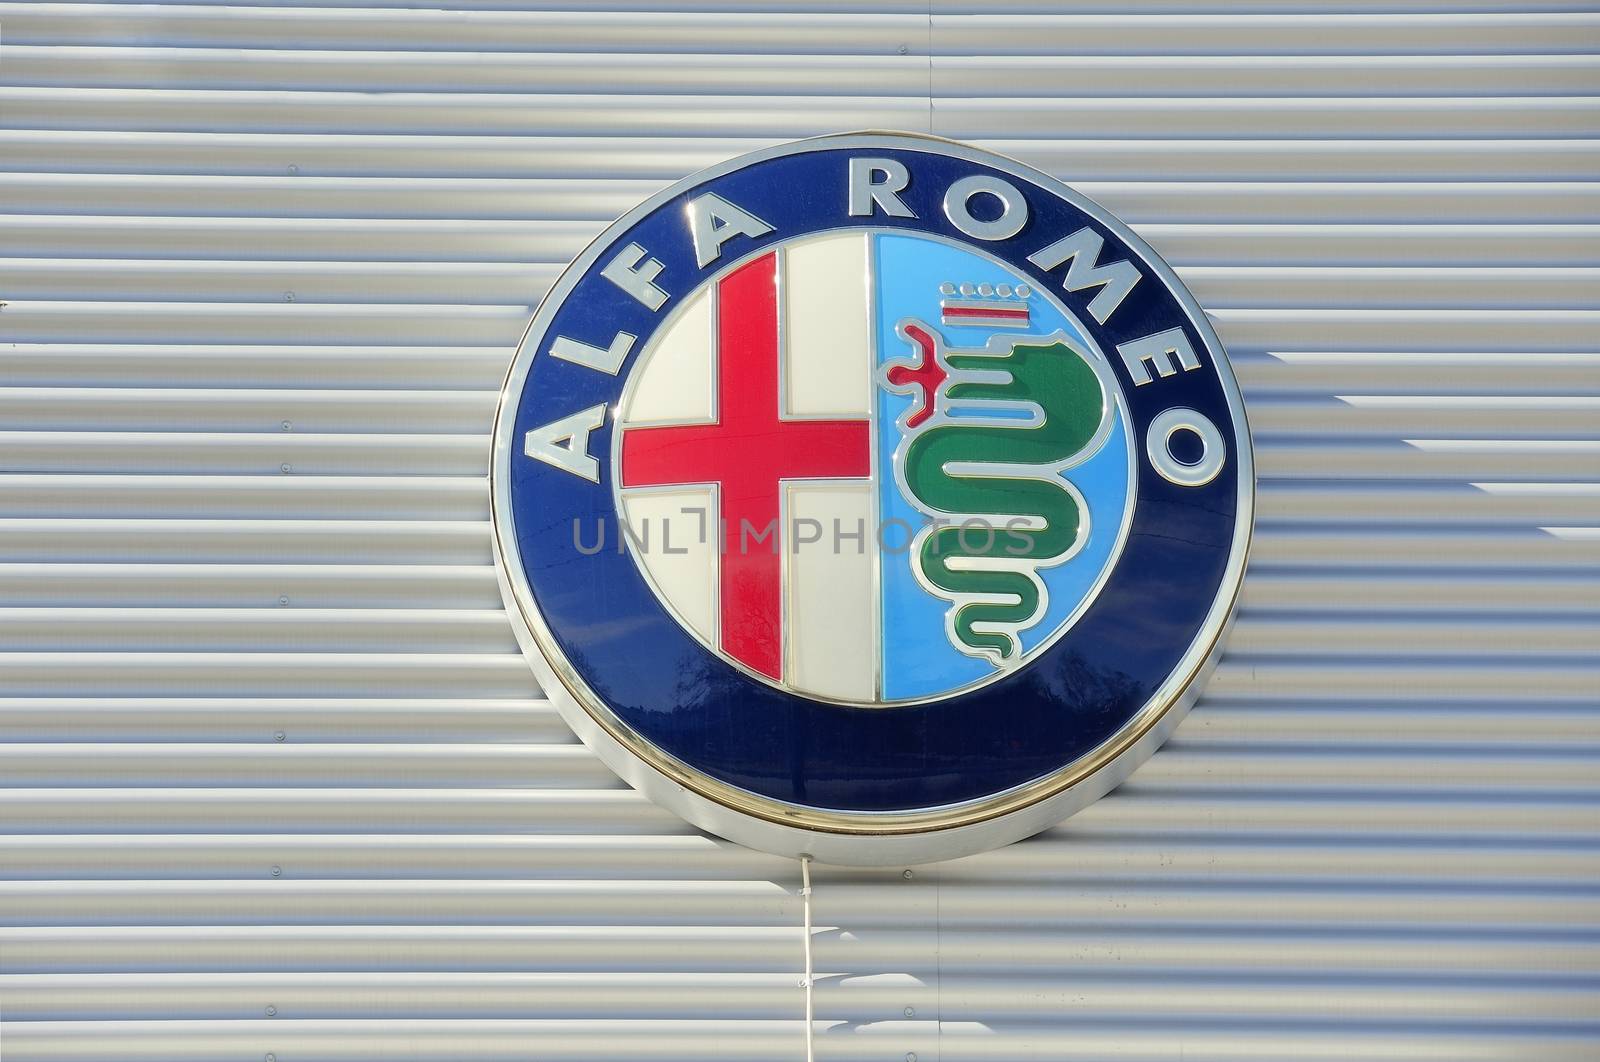 STOCKHOLM - MAY 1 2013: Alfa Romeo logo sign on showroom premises photographed on may 1th 2013 in Stockholm, Sweden.